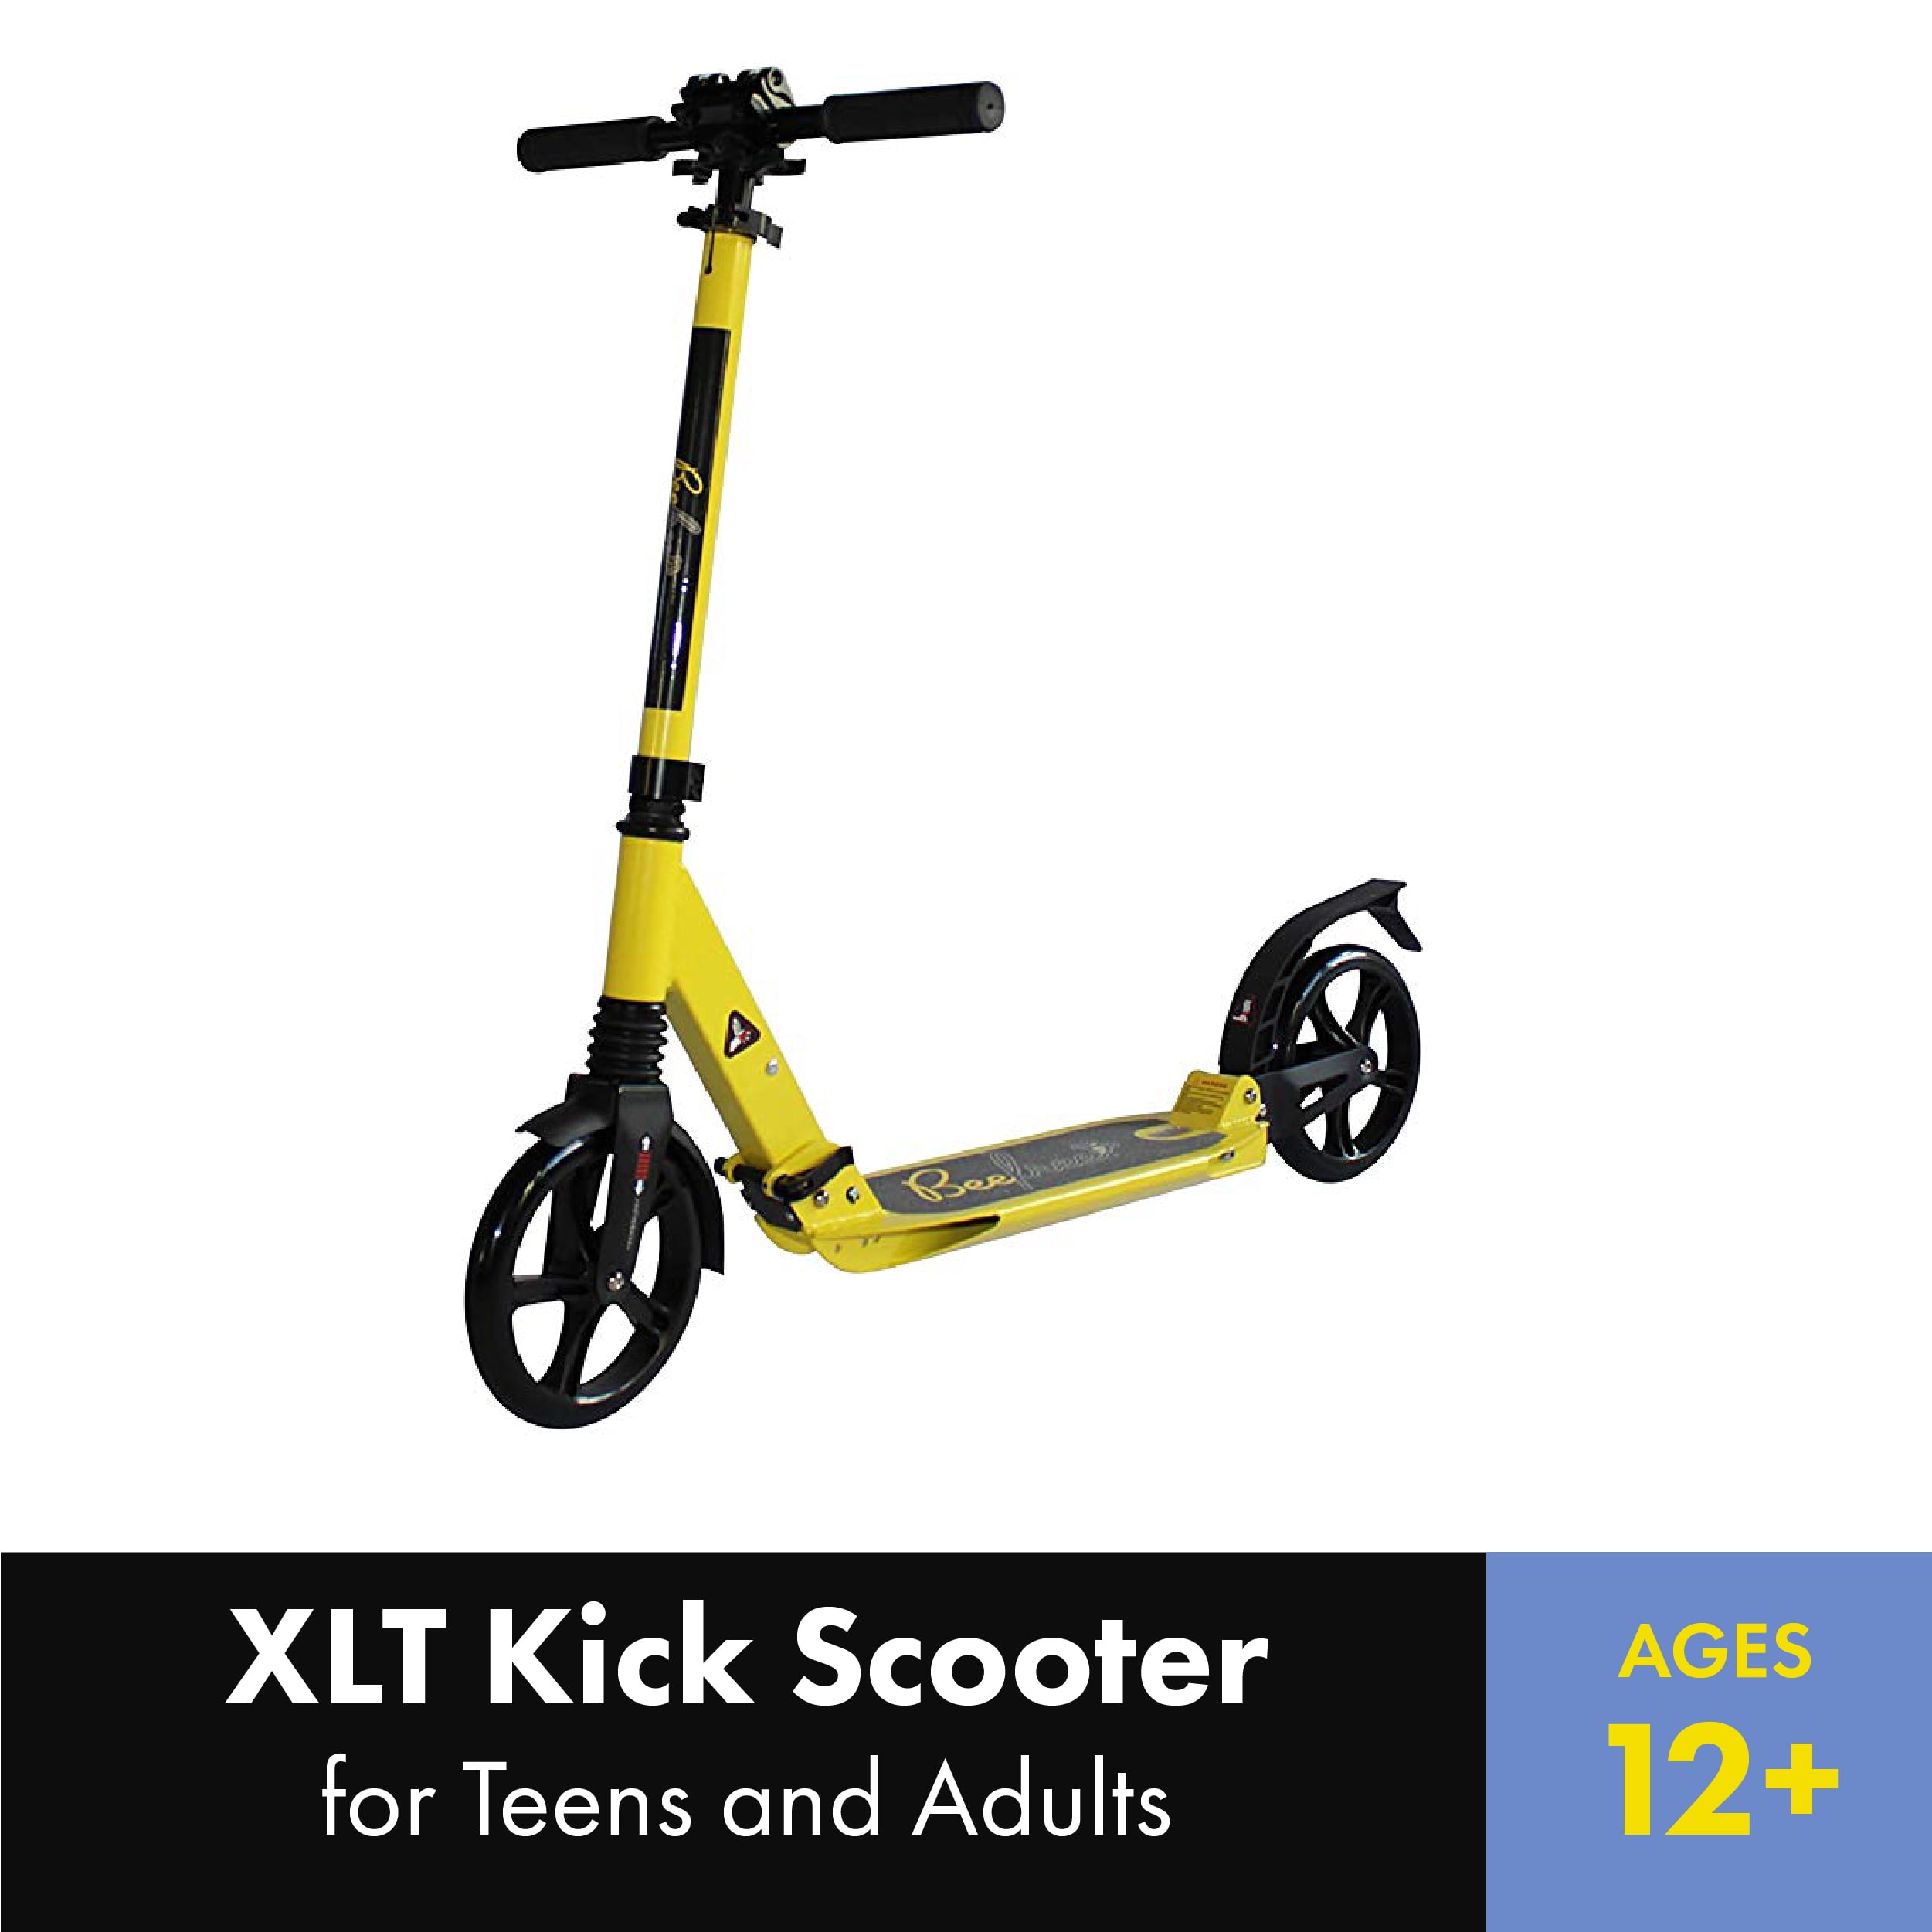 Details about   Razor Spark Ultra Aluminum Kick Scooter Red with LED Lights Kids Ride On Toy New